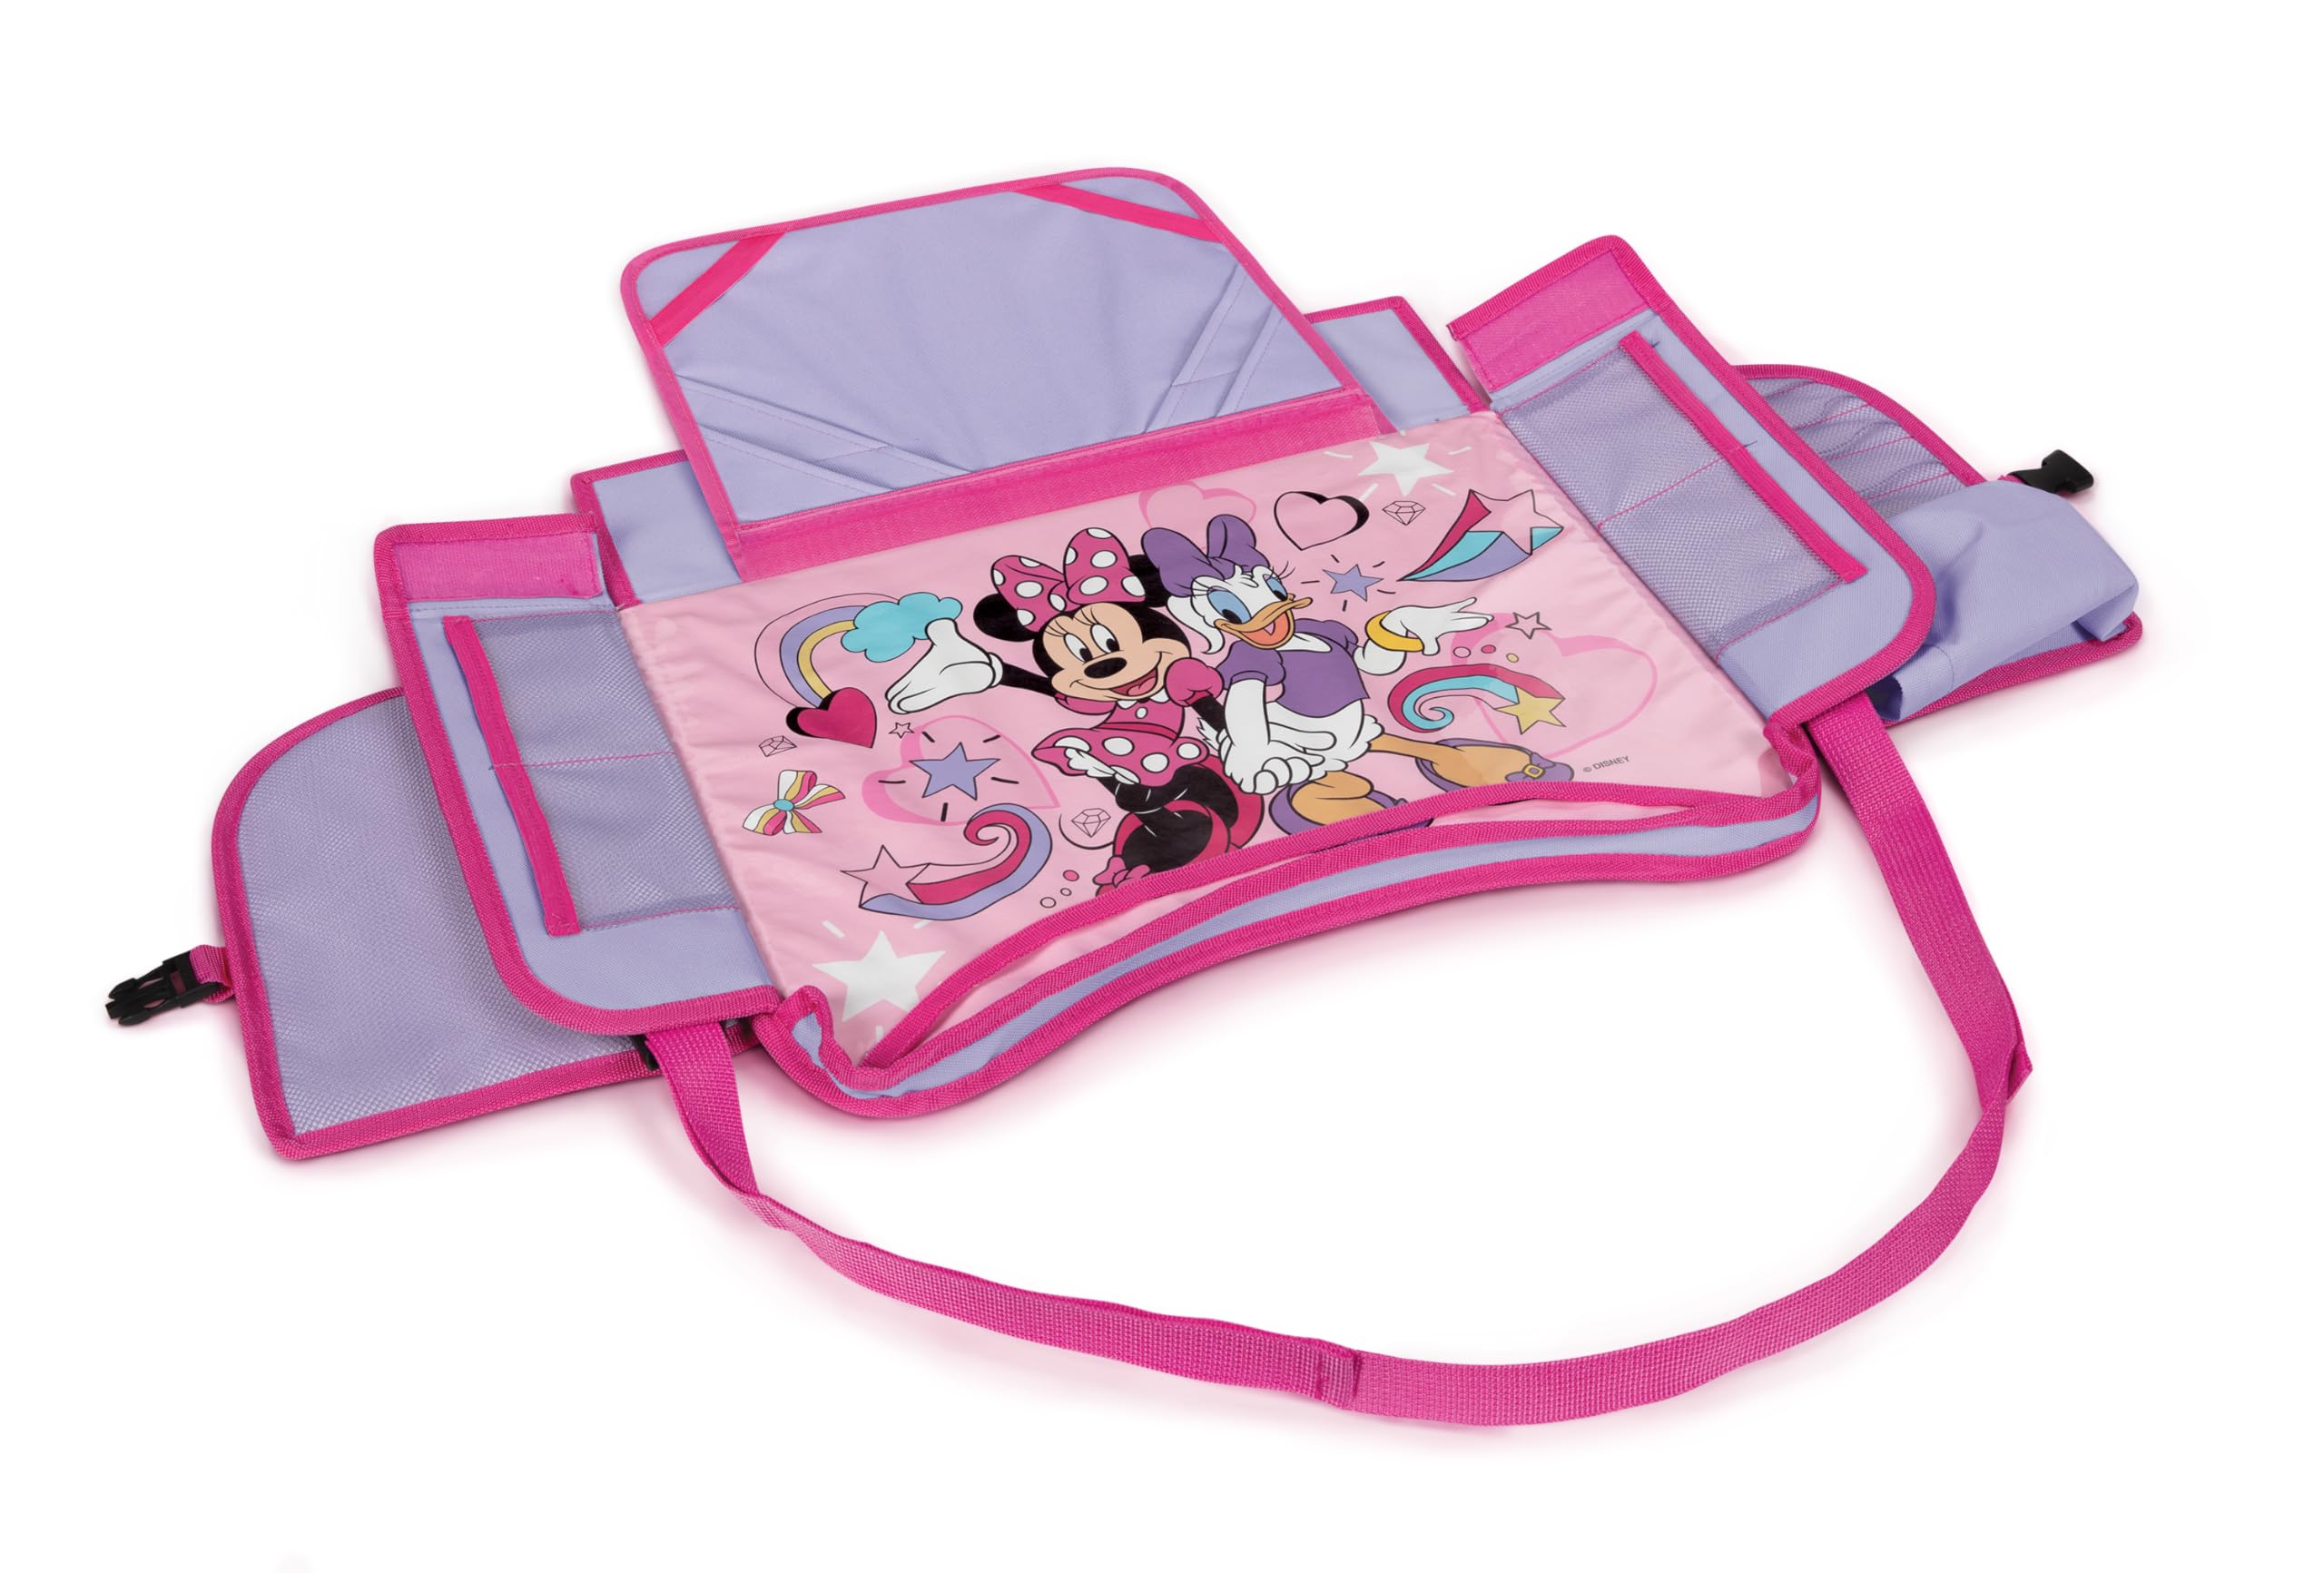 Minnie Mouse Kids Travel Tray for Car, Toddler Car Seat Tray for Travel, Car Trays for Kids Roadtrip Essentials & Activities